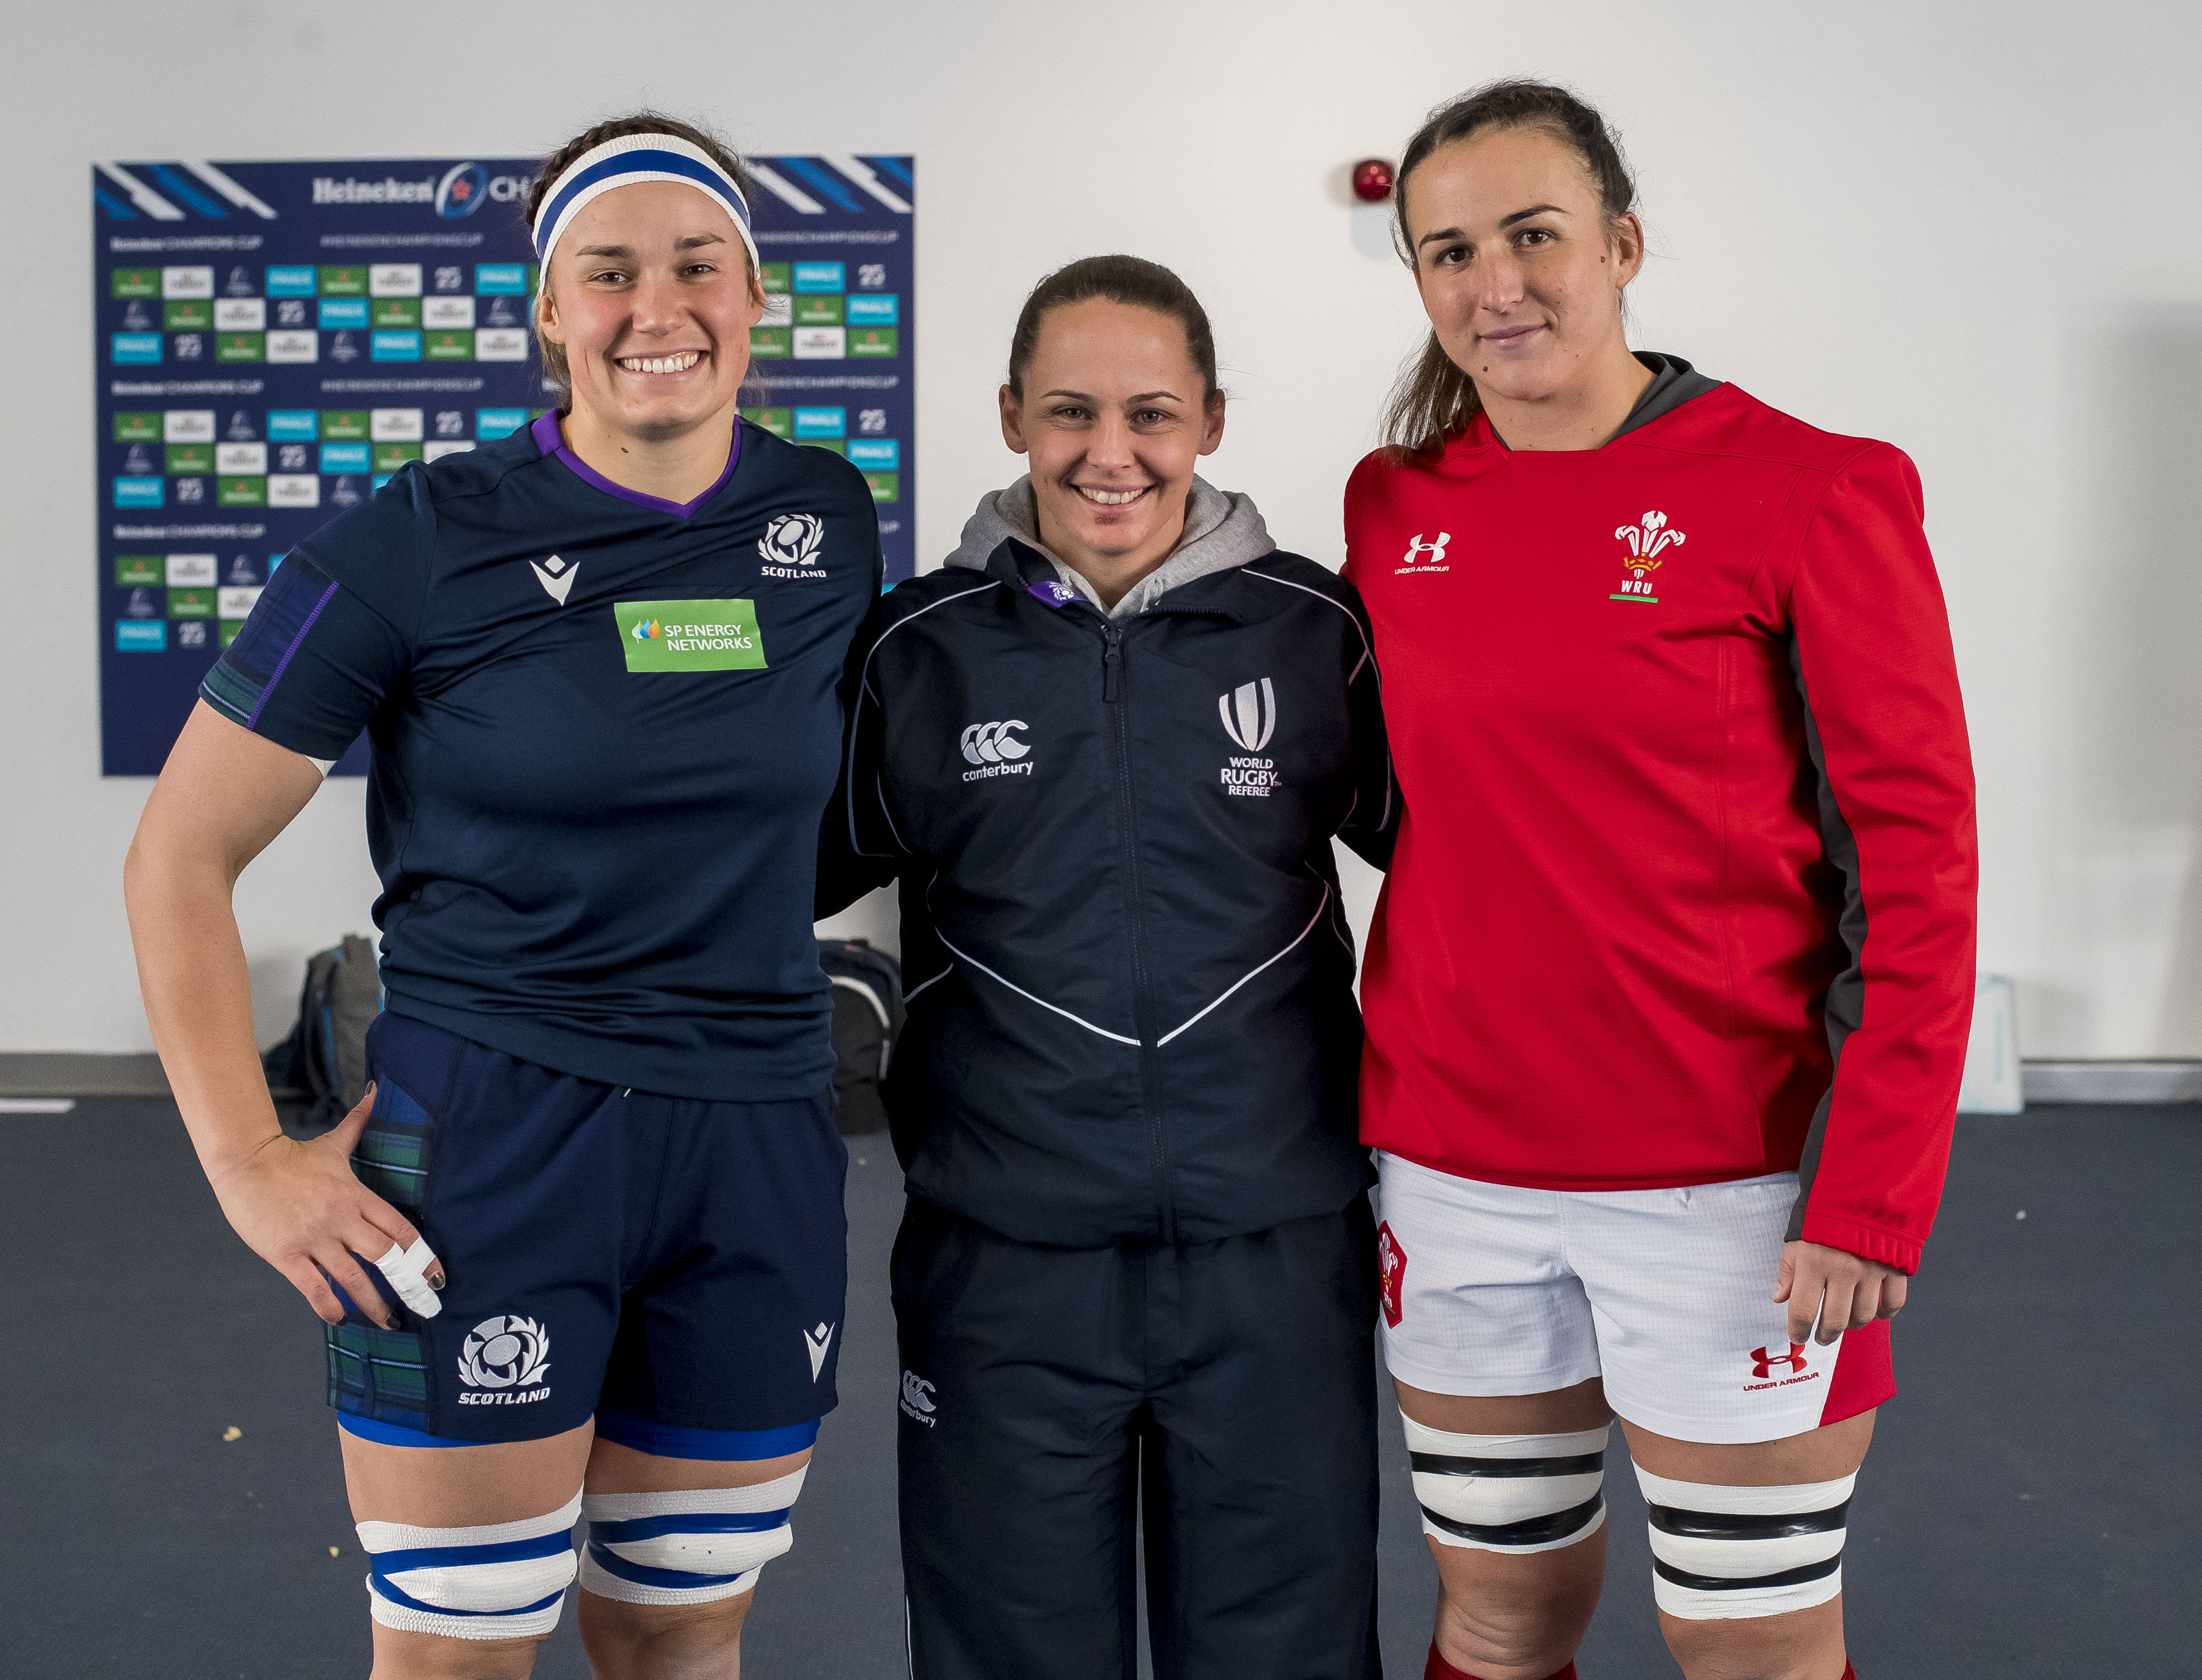 Captain Nikki O’Donnell QARANC continues her World Rugby officiating journey